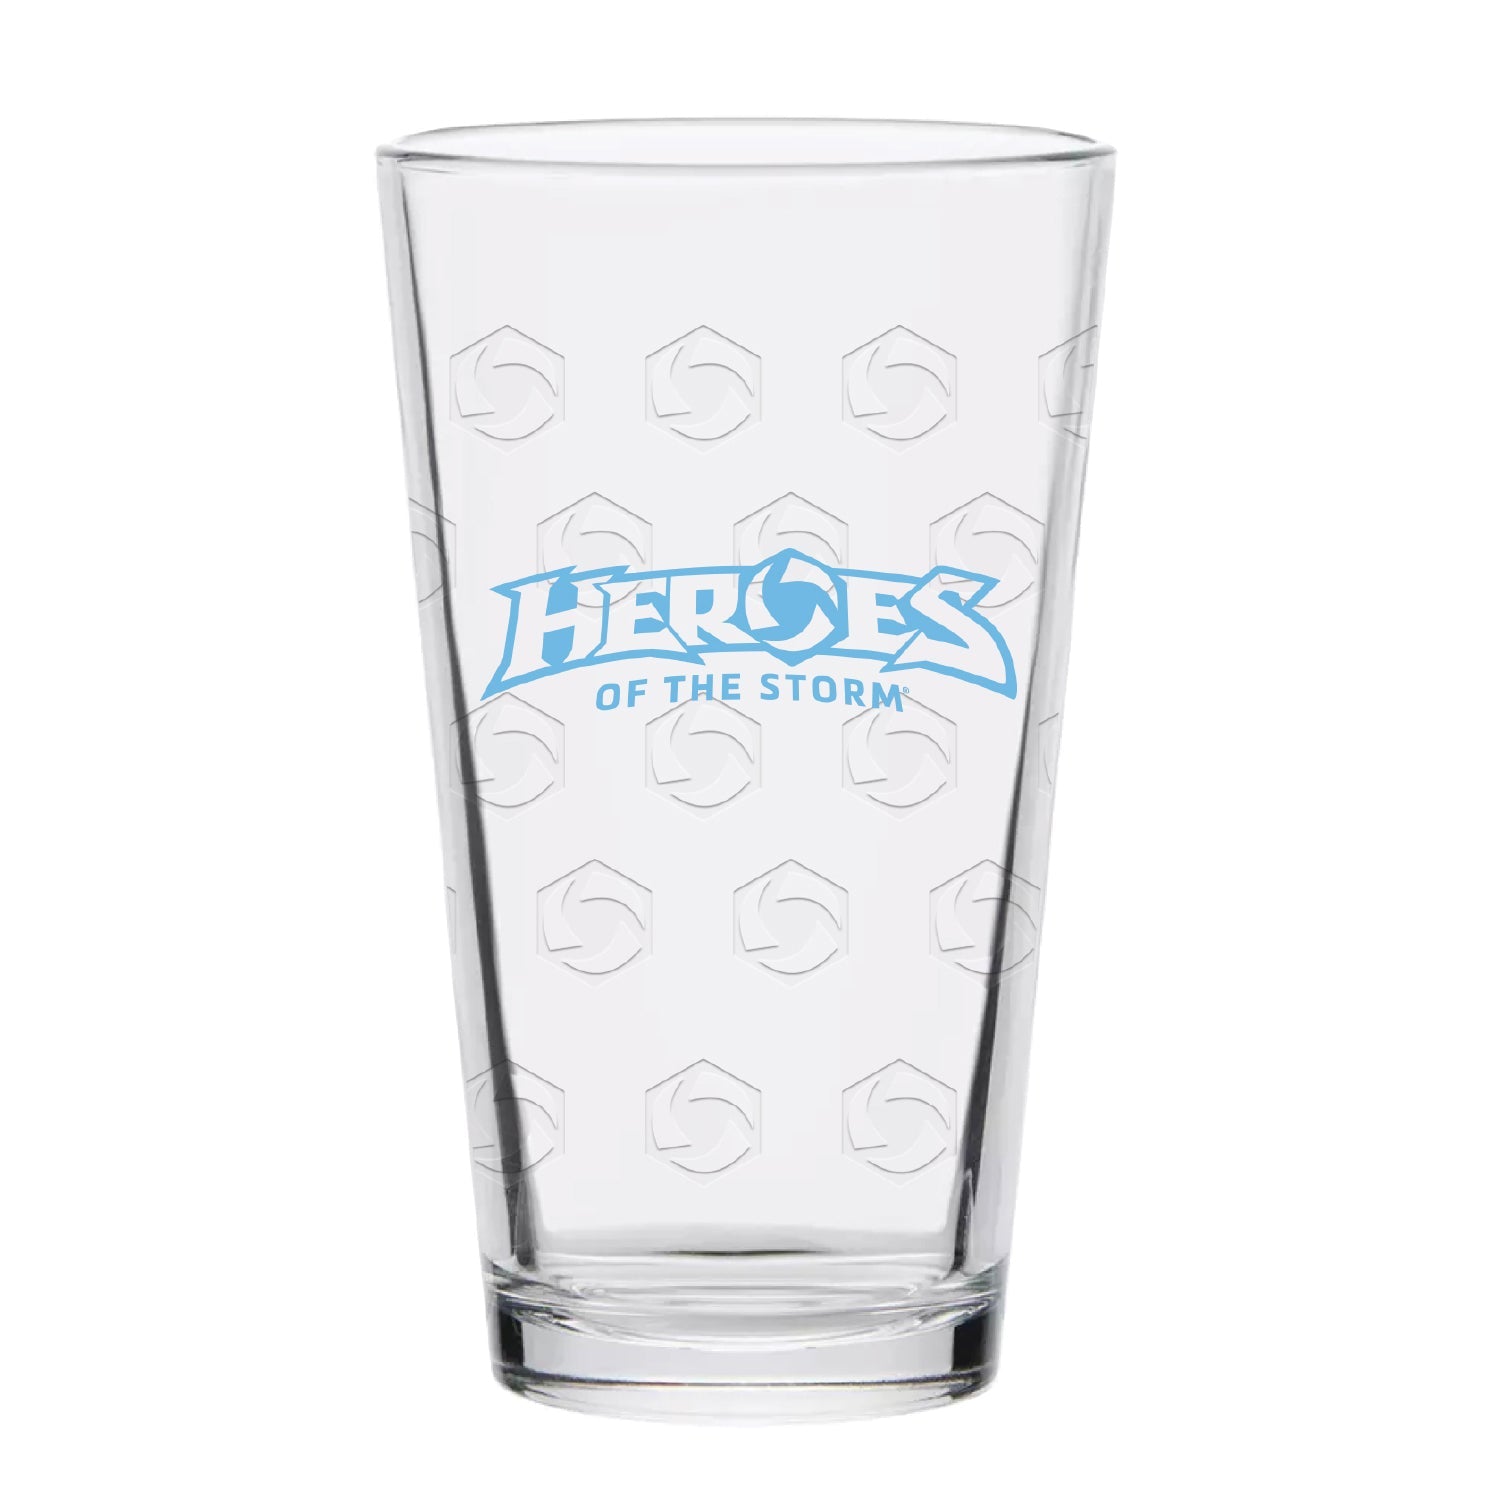 Heroes of the Storm 454ml Pint Glass in Blue - Front View